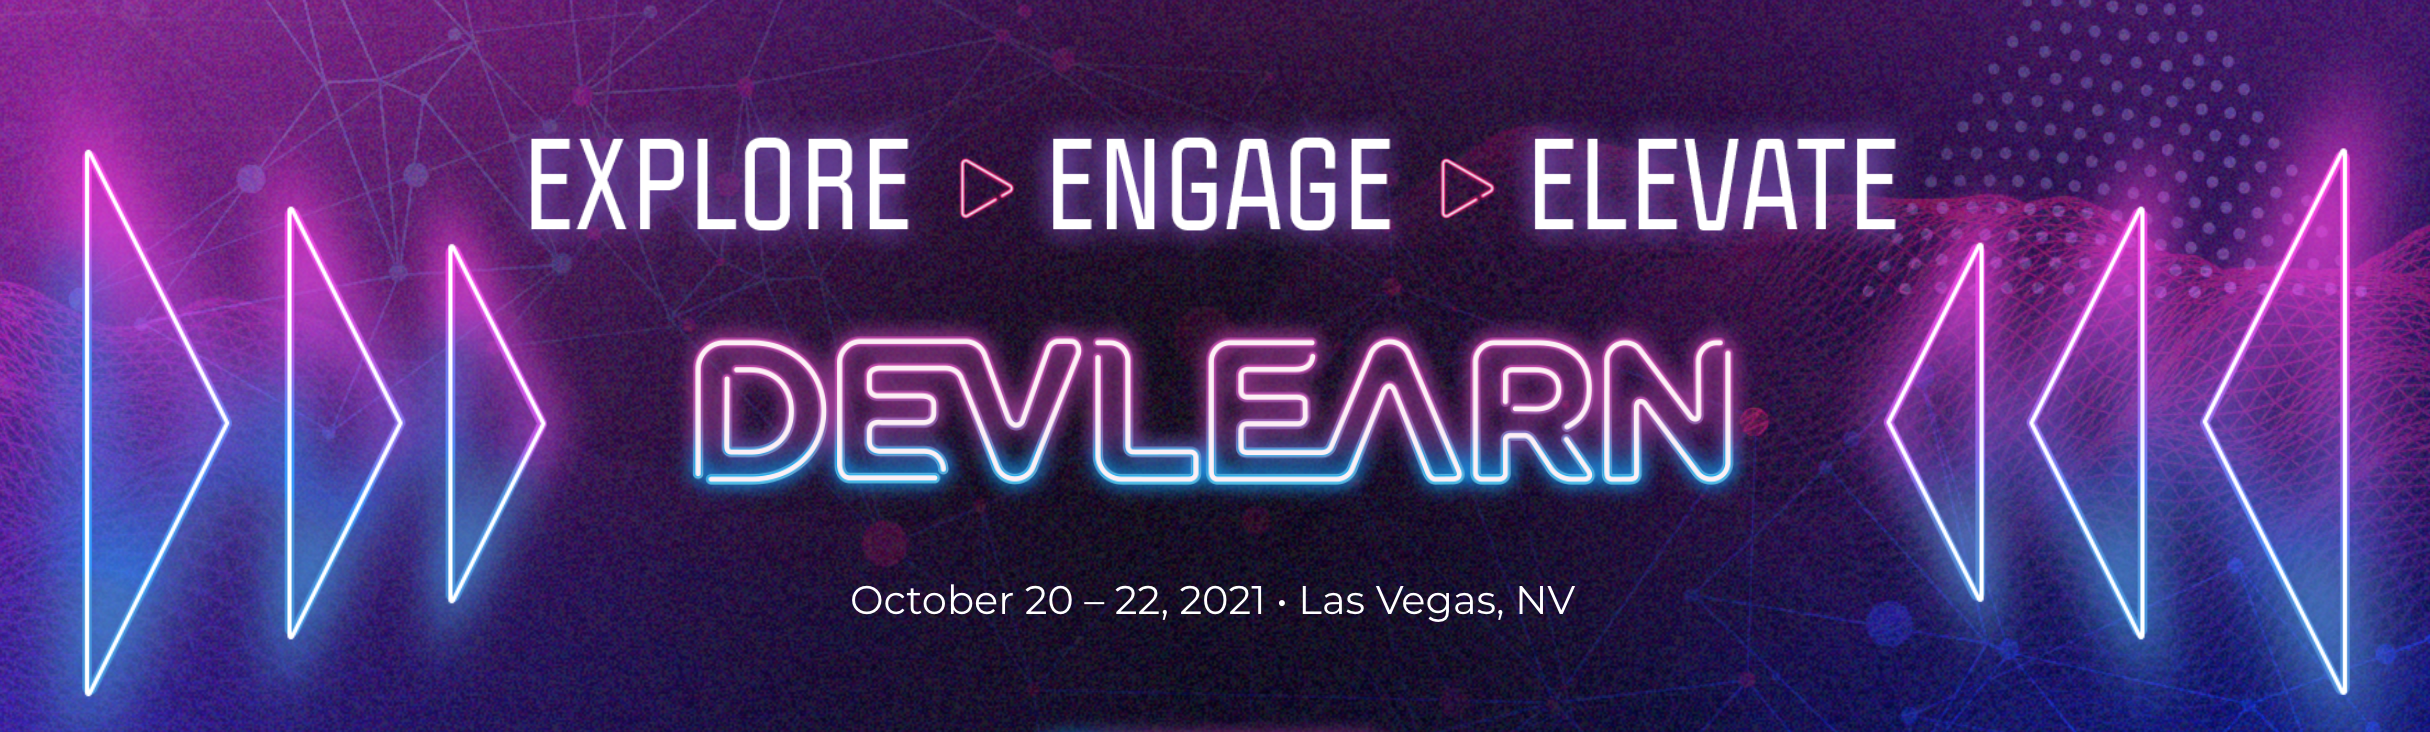 Connect with RISC at DevLearn 2021!